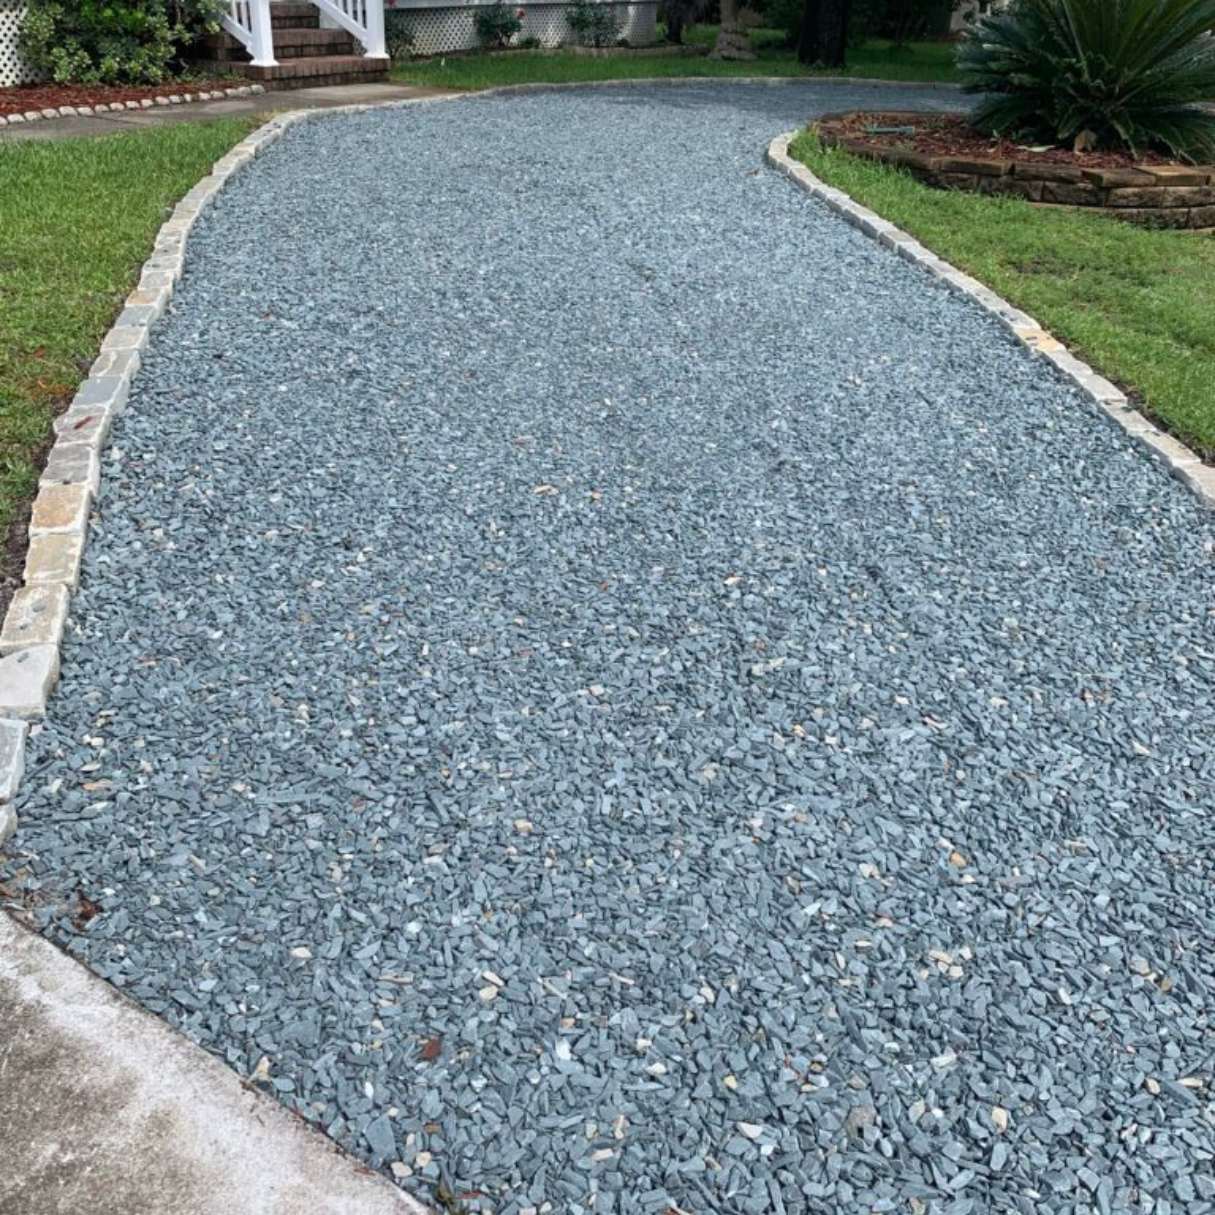 How To Keep A Gravel Driveway From Washing Out